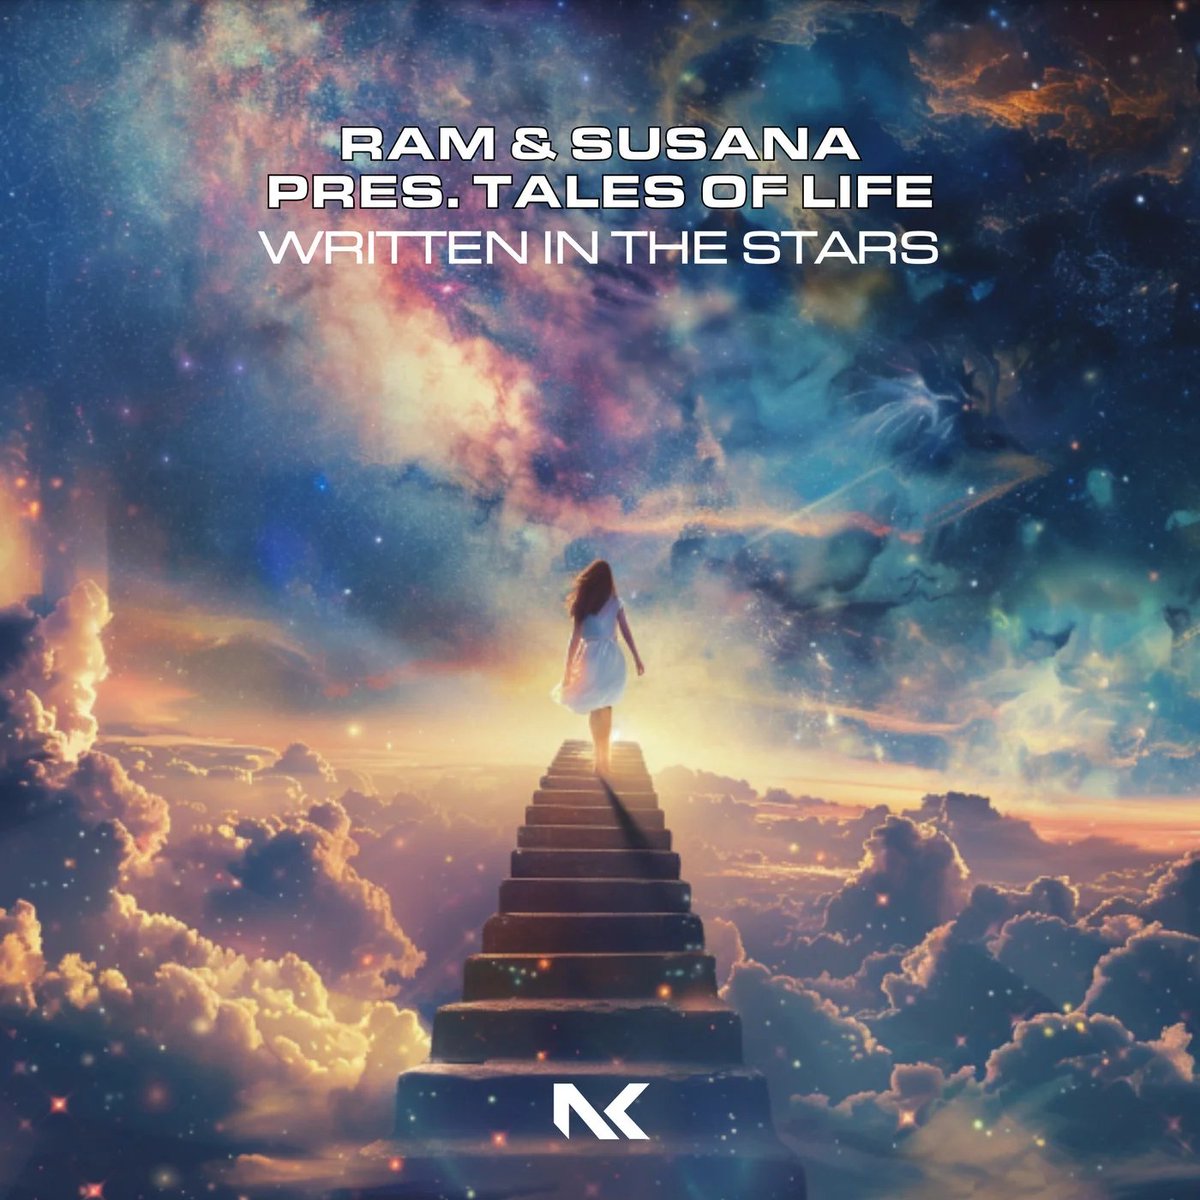 Out via @NKMus_Official... @djramnl & @SusanaVocalist pres. Tales Of Life - Written in the Stars tranceattack.net/ram-susana-pre…